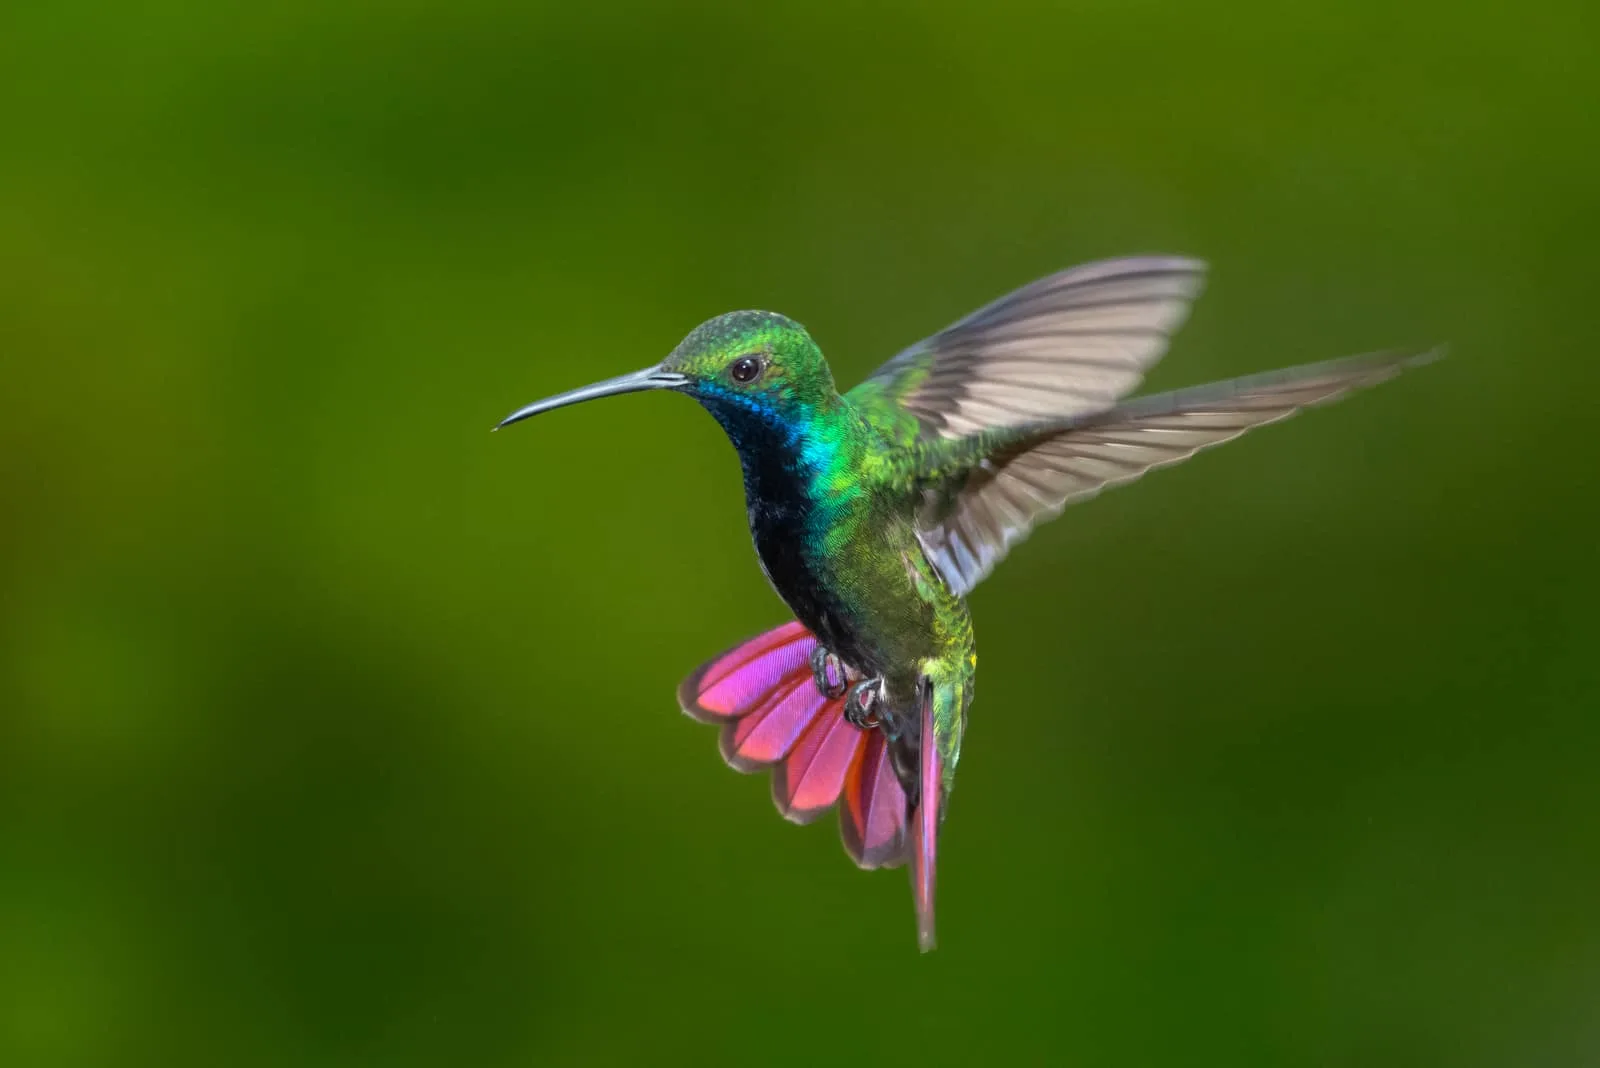 Black-throated Mango hummingbird hovering in the air